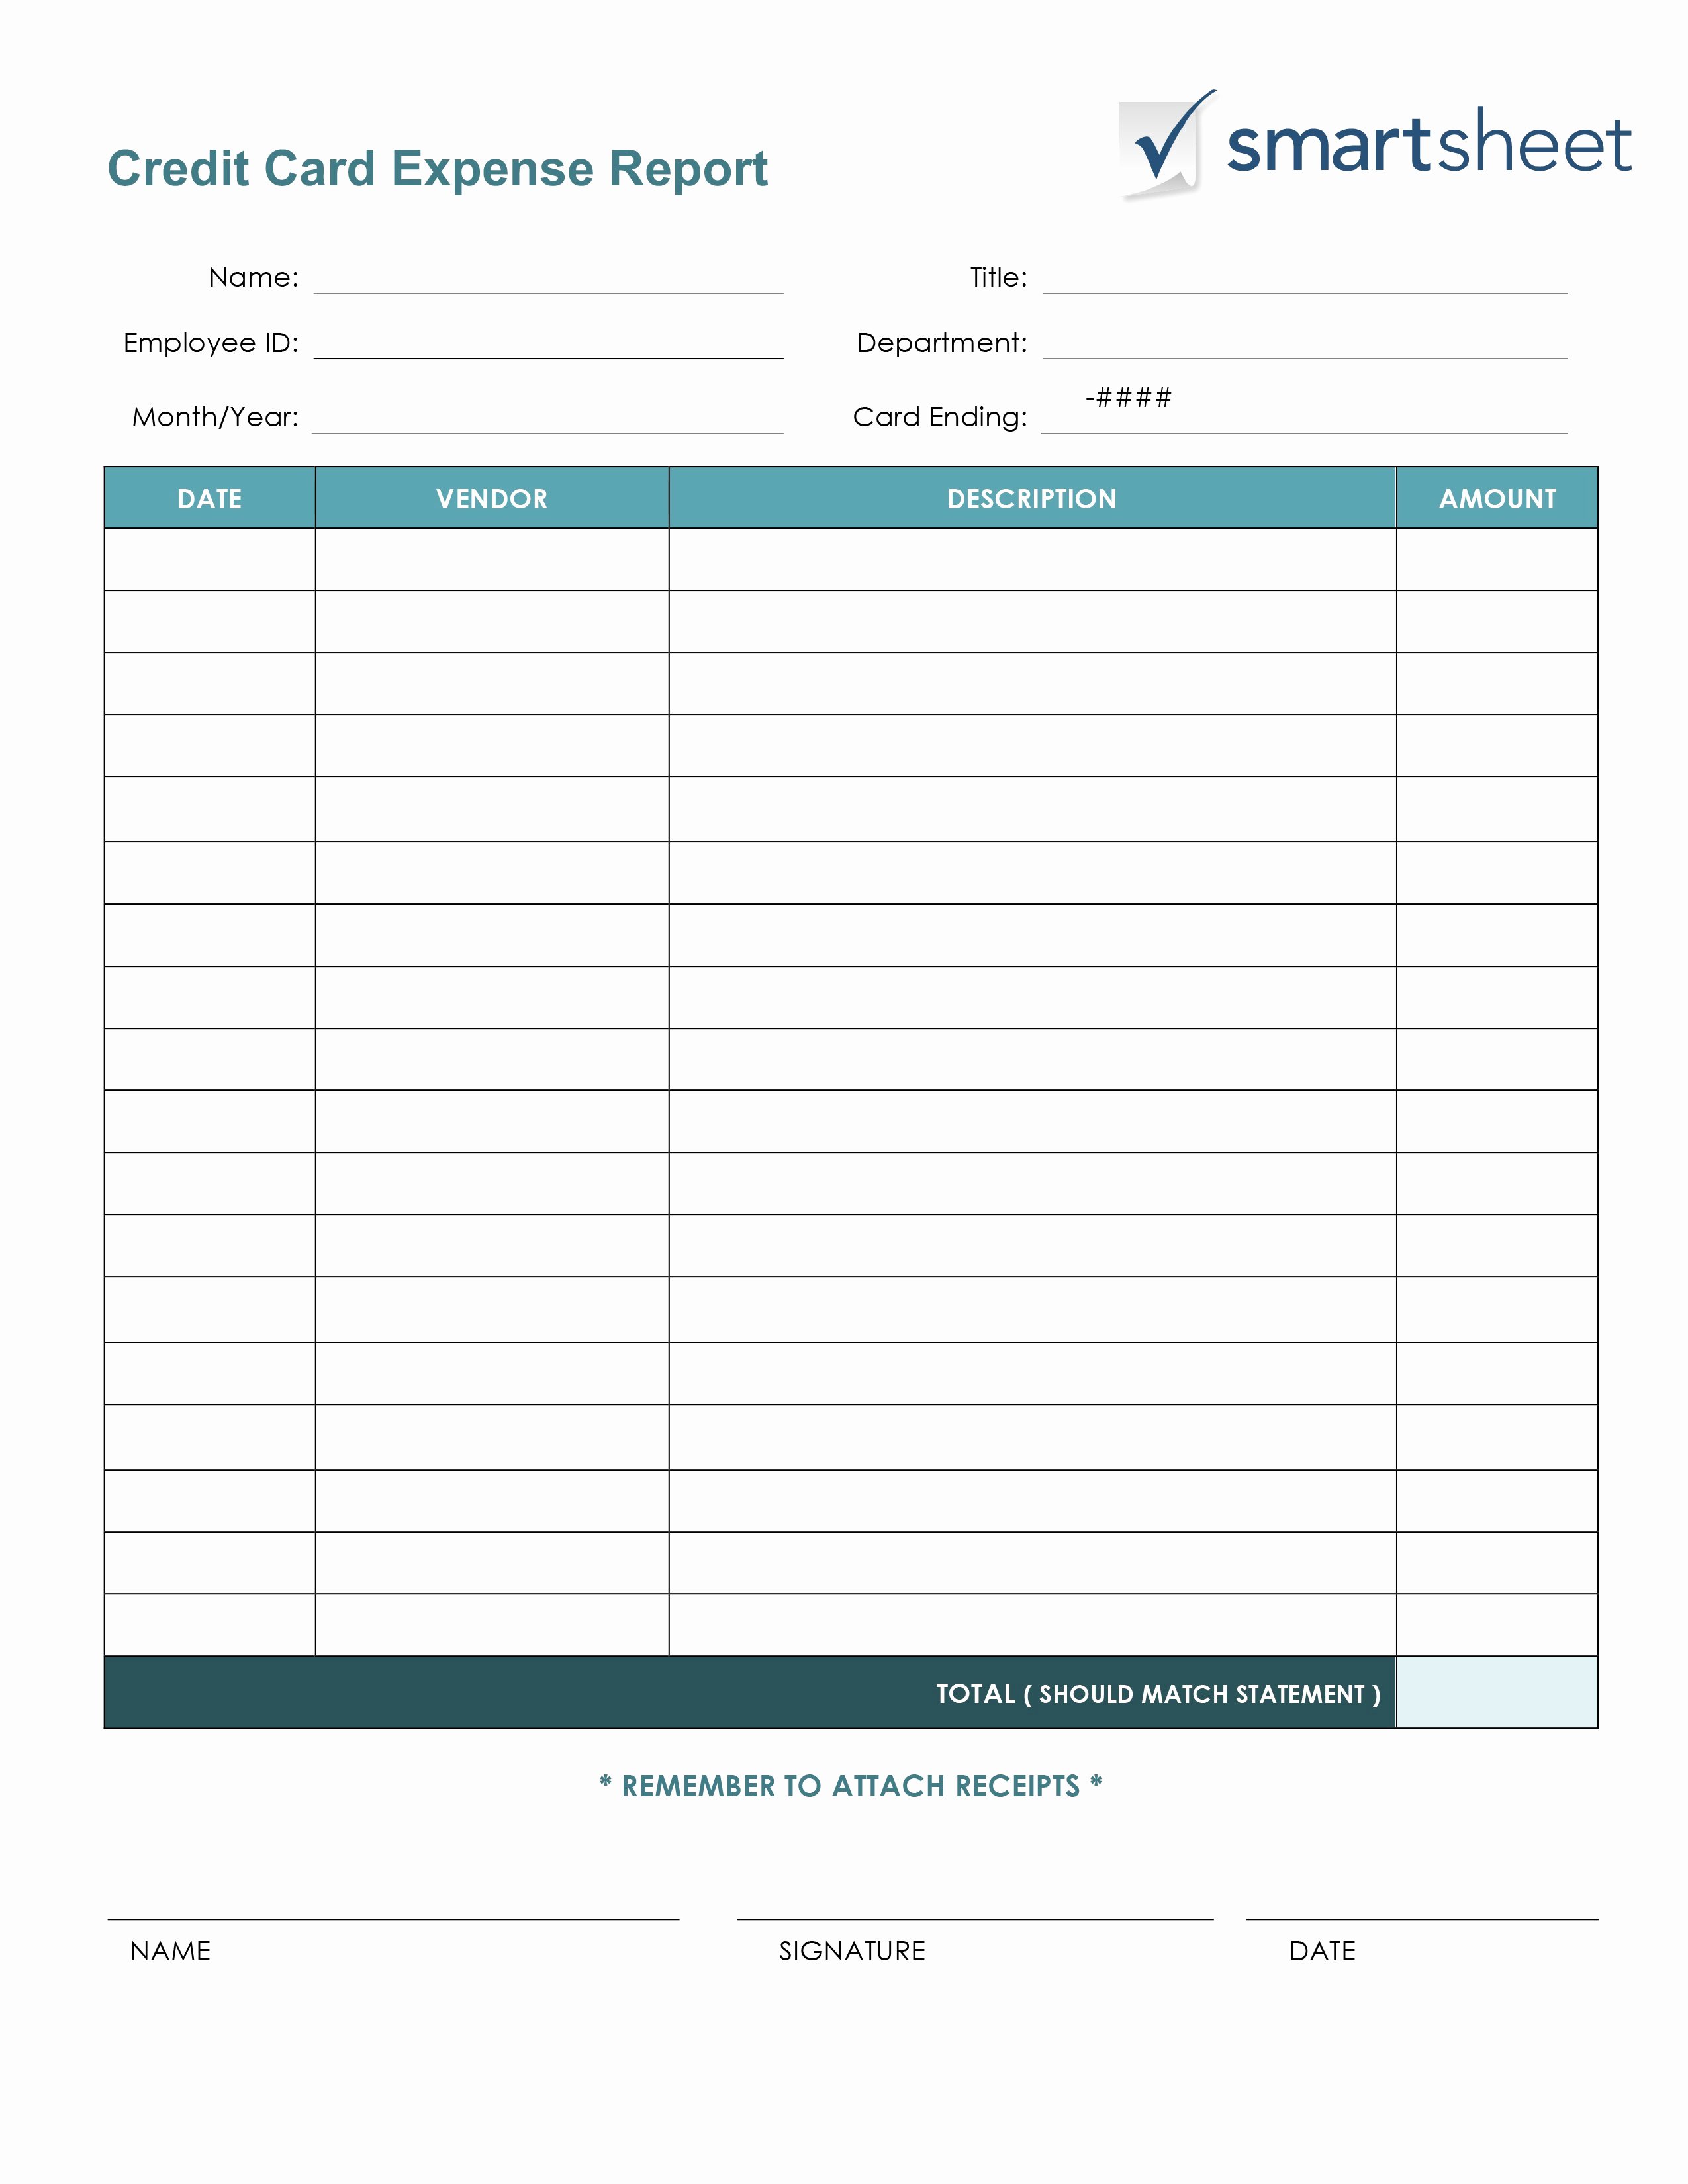 Business Expense Template Free New Free Expense Report Templates Smartsheet